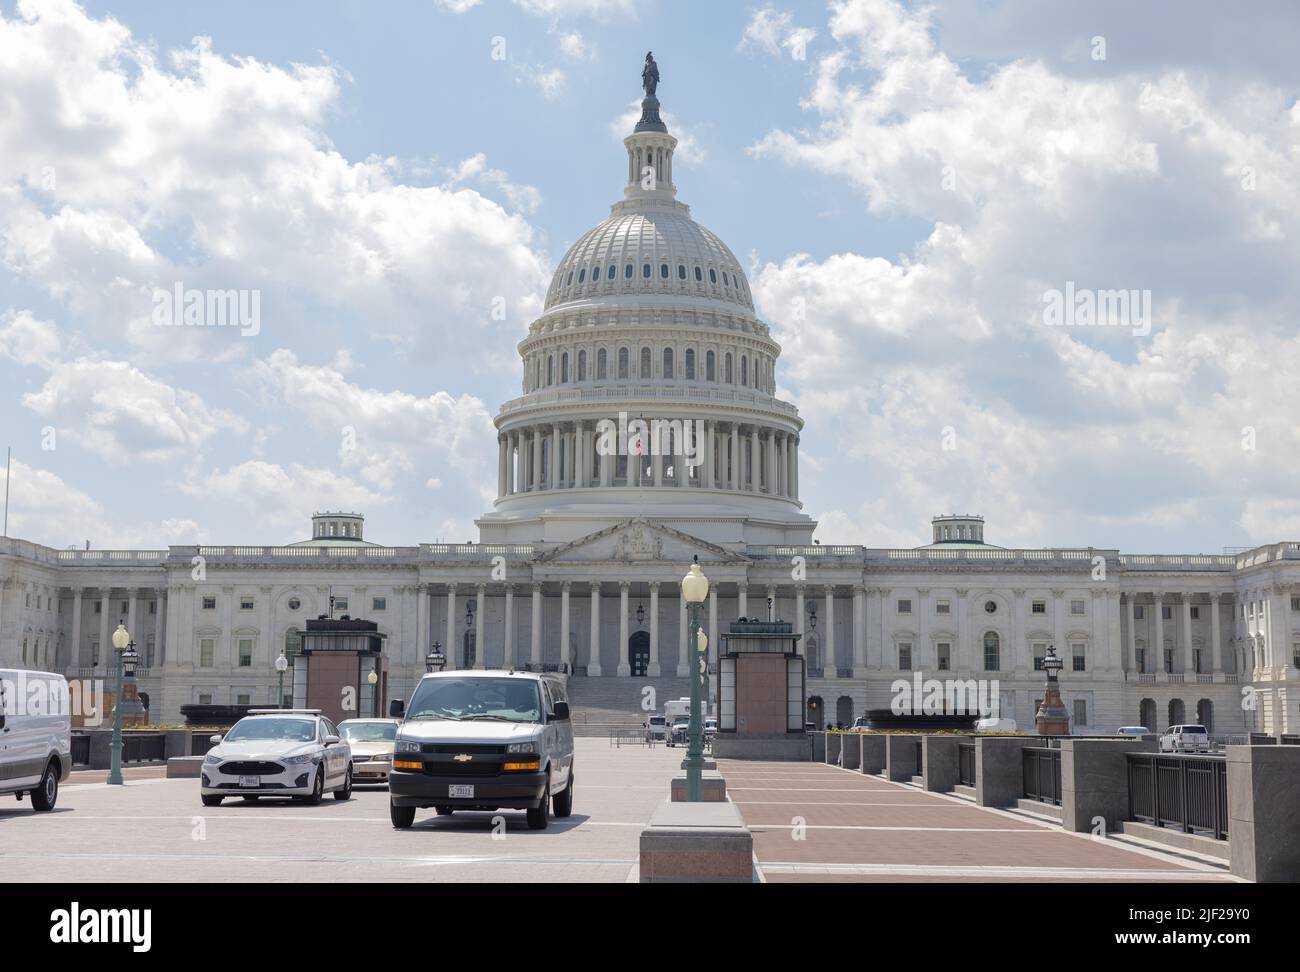 WASHINGTON, D.C. – June 25, 2022: The United States Capitol is seen on a Saturday afternoon in June. Stock Photo